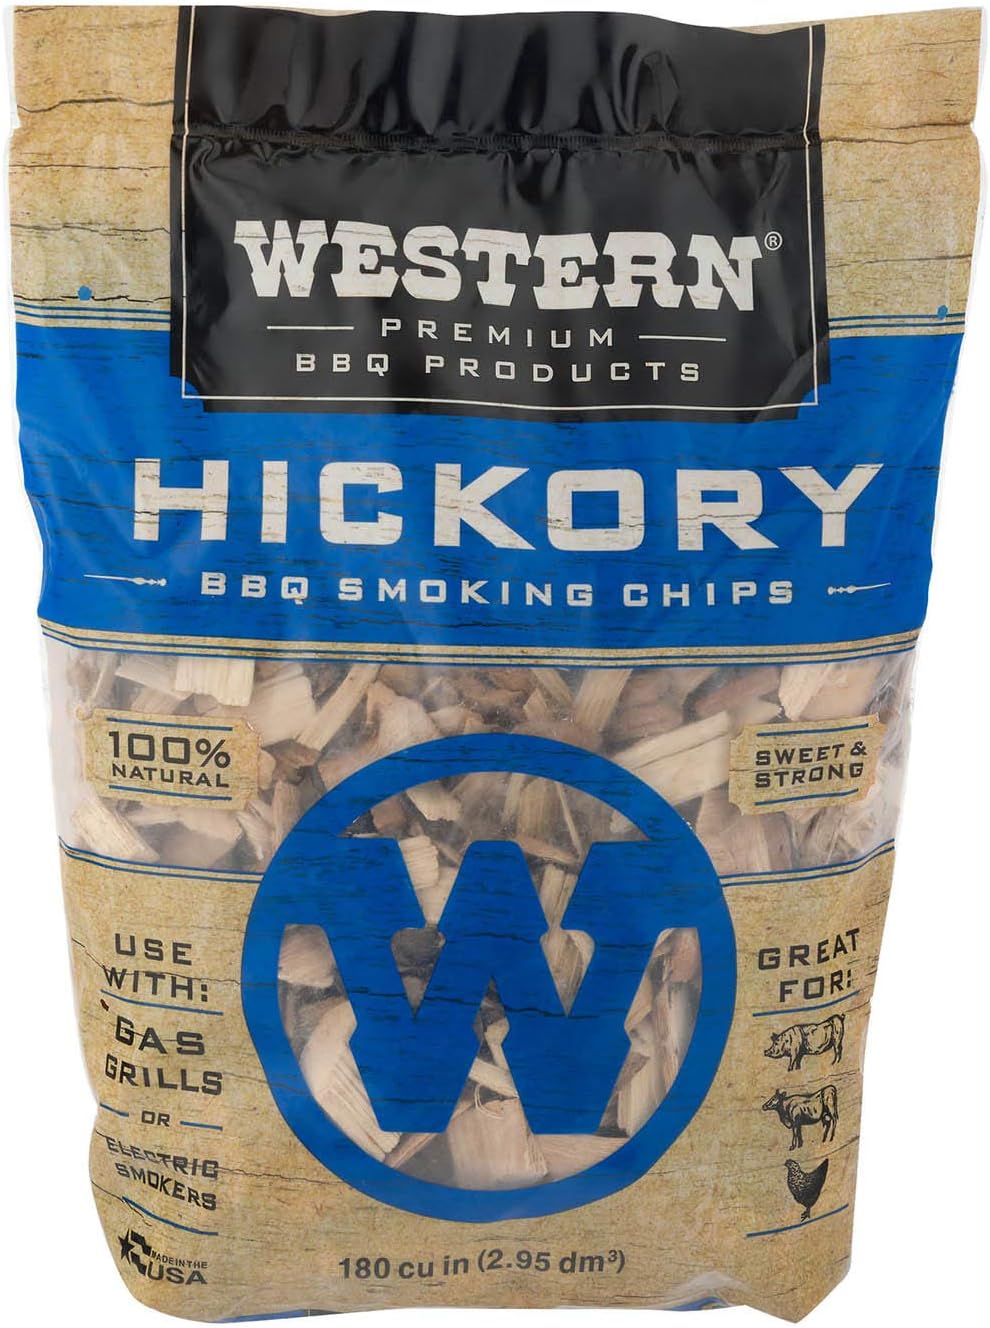 You are currently viewing Western Premium BBQ Products Hickory BBQ Smoking Chips